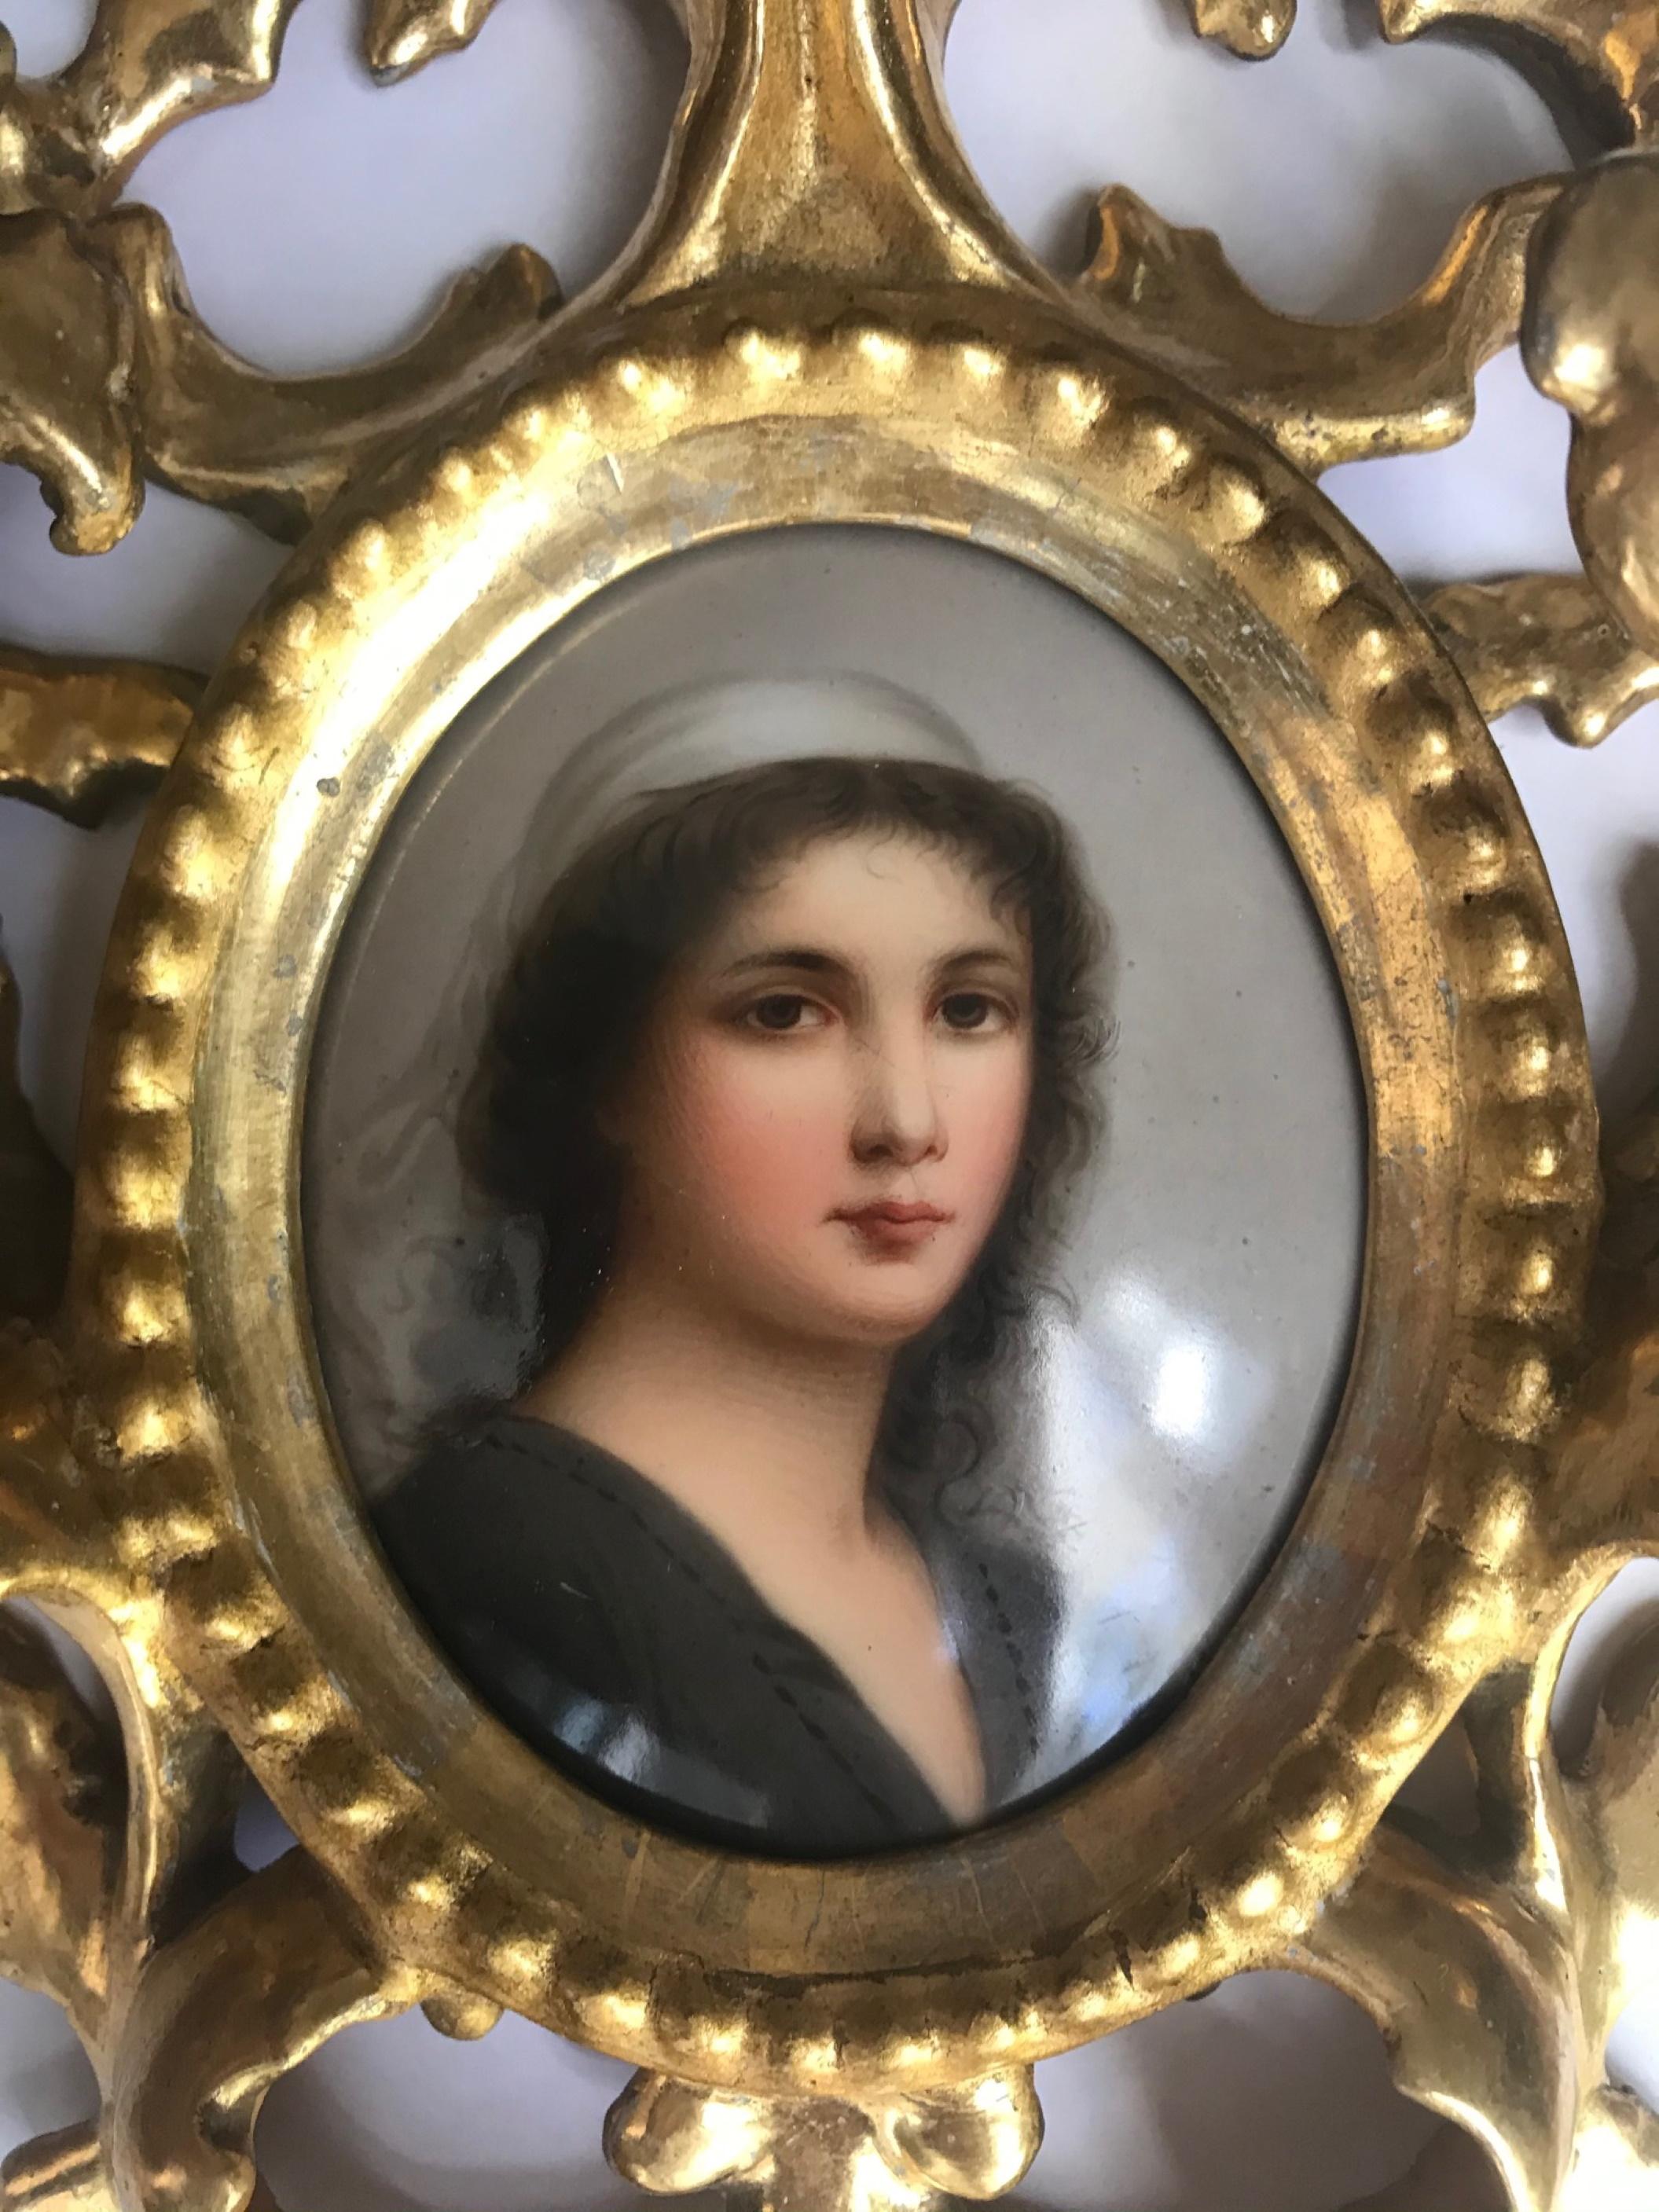 Antique porcelain portrait miniature plaque KPM style.

This lovely German hand painted oval porcelain plaque is a beautiful and skillful wall hanging portrait of Ruth. It is housed in a gorgeous, ornate hand carved water gilded Florentine